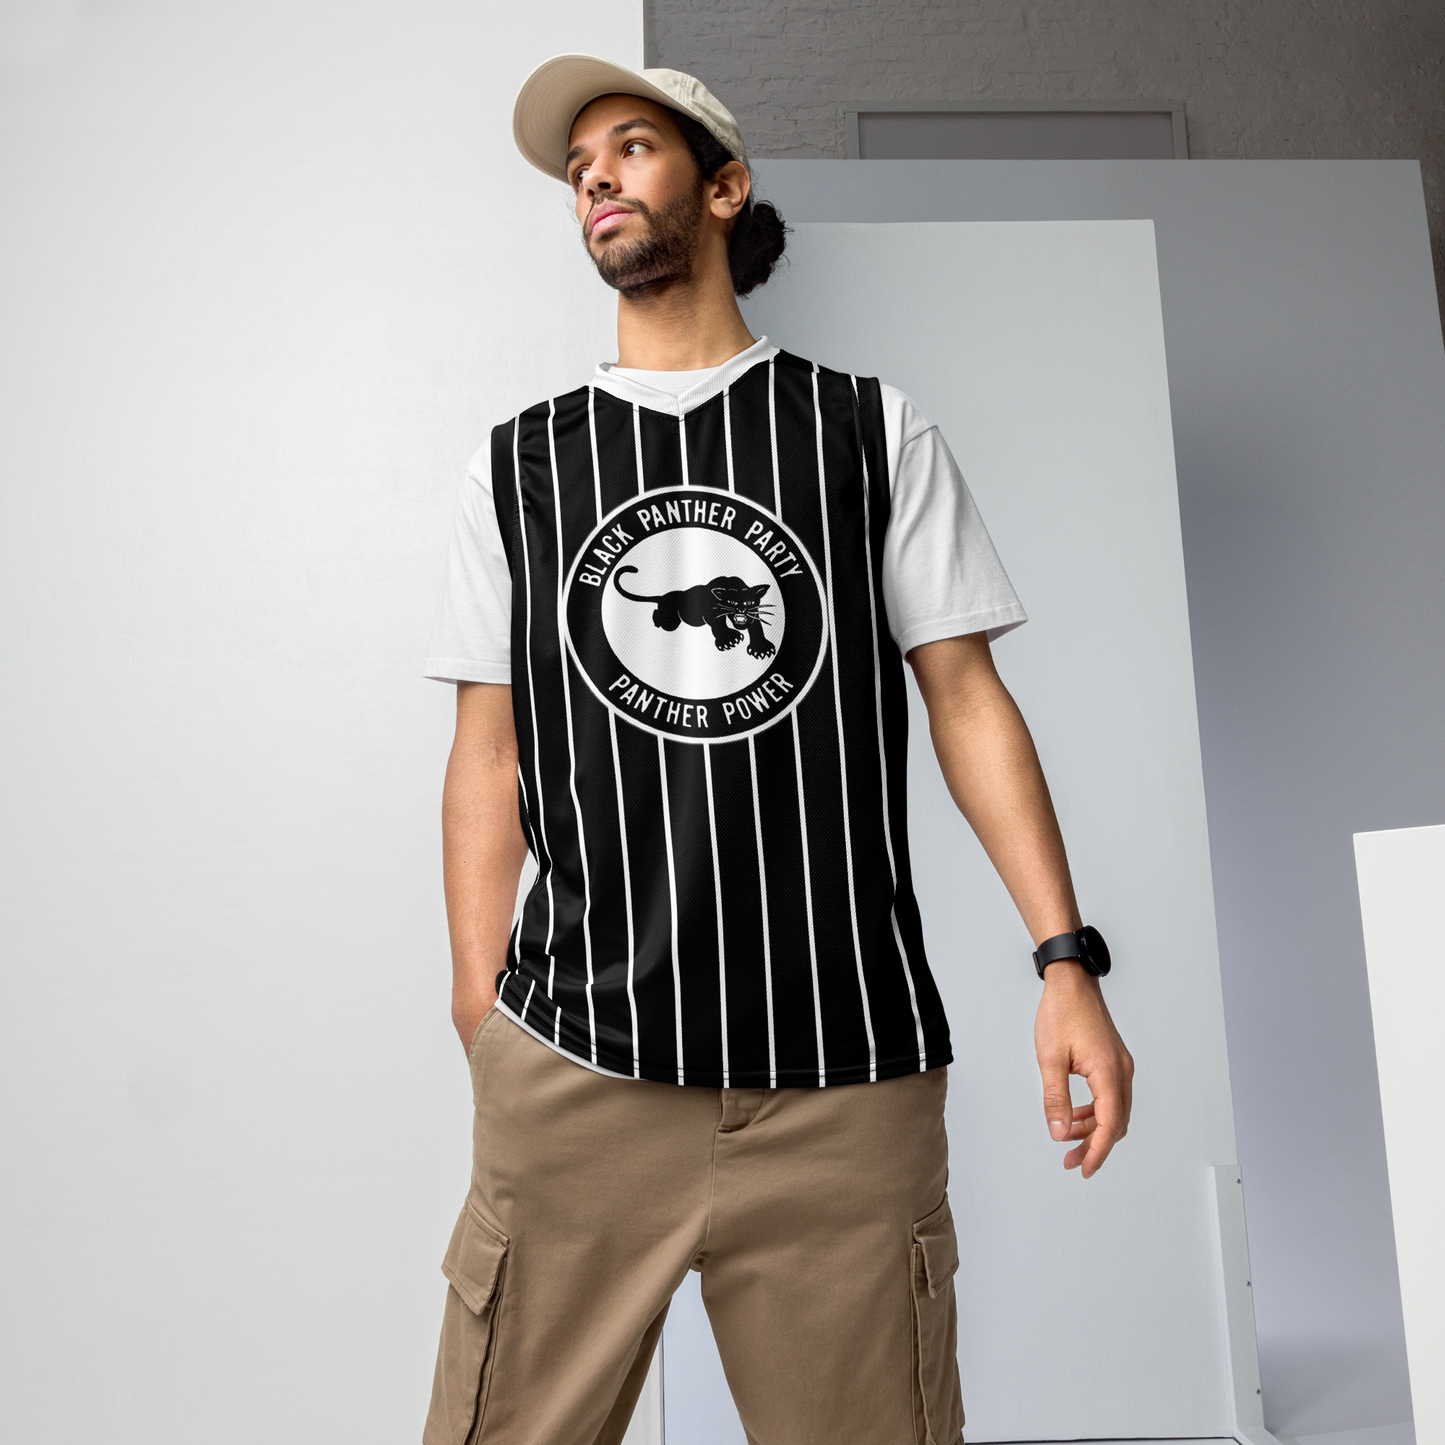 Black Panther Party Recycled Basketball Jersey